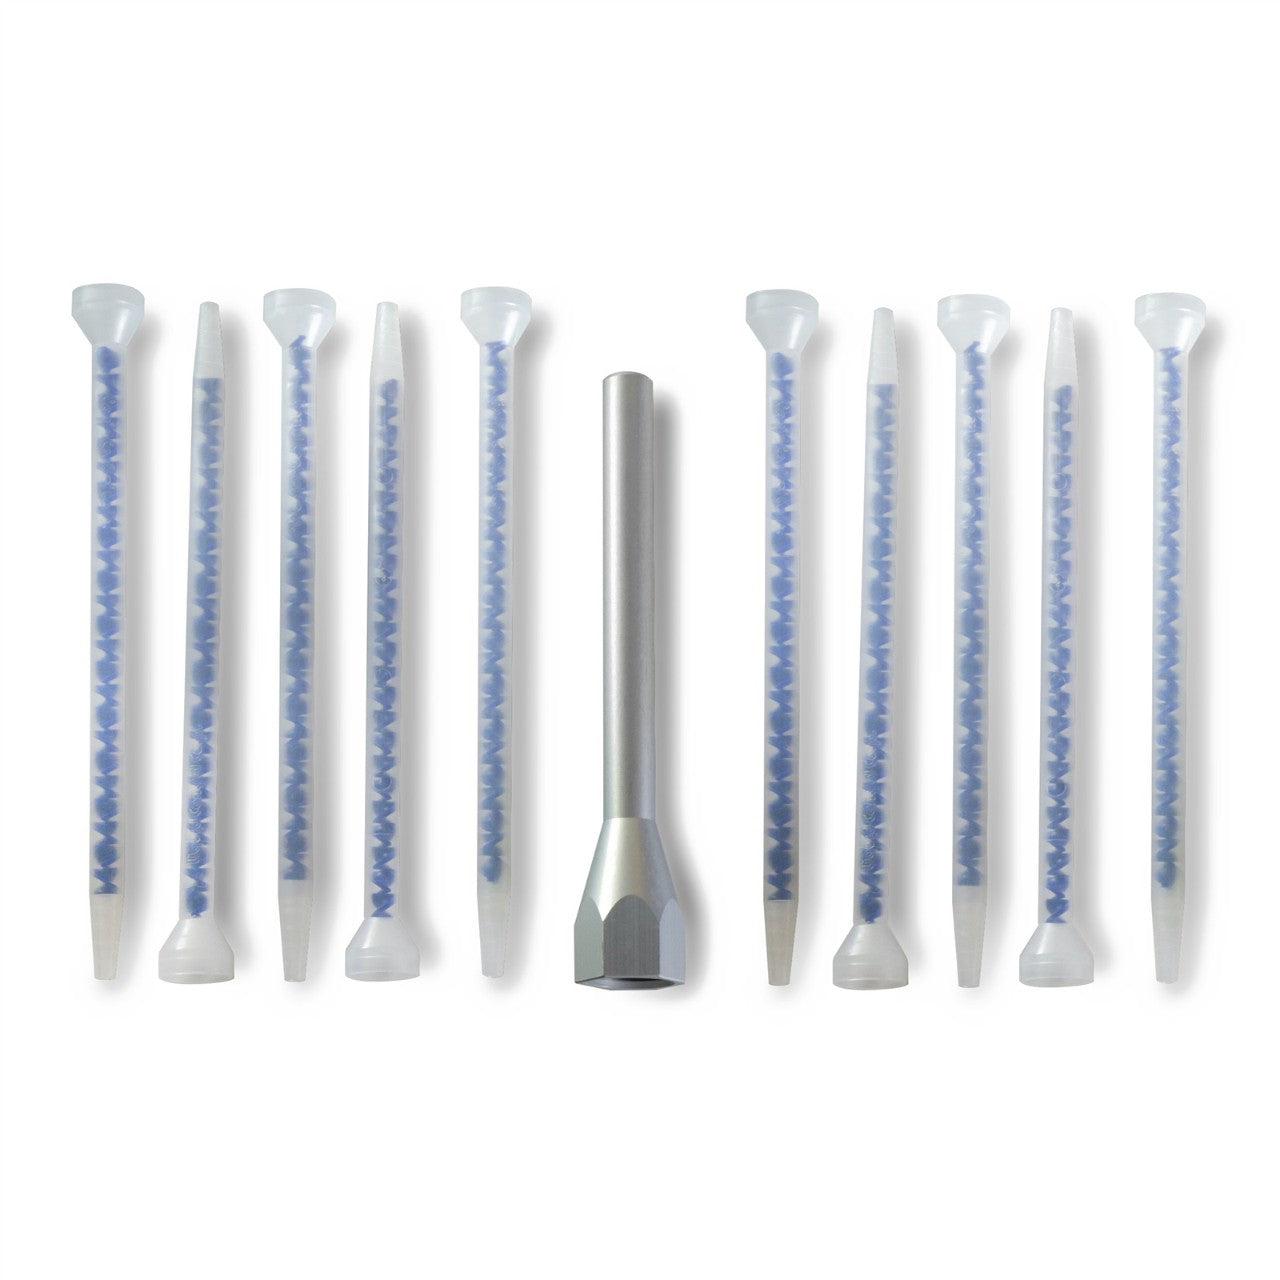 10-Pack of 3/8 in (9.8 mm) x 36 Element PosiMixer® with Shroud